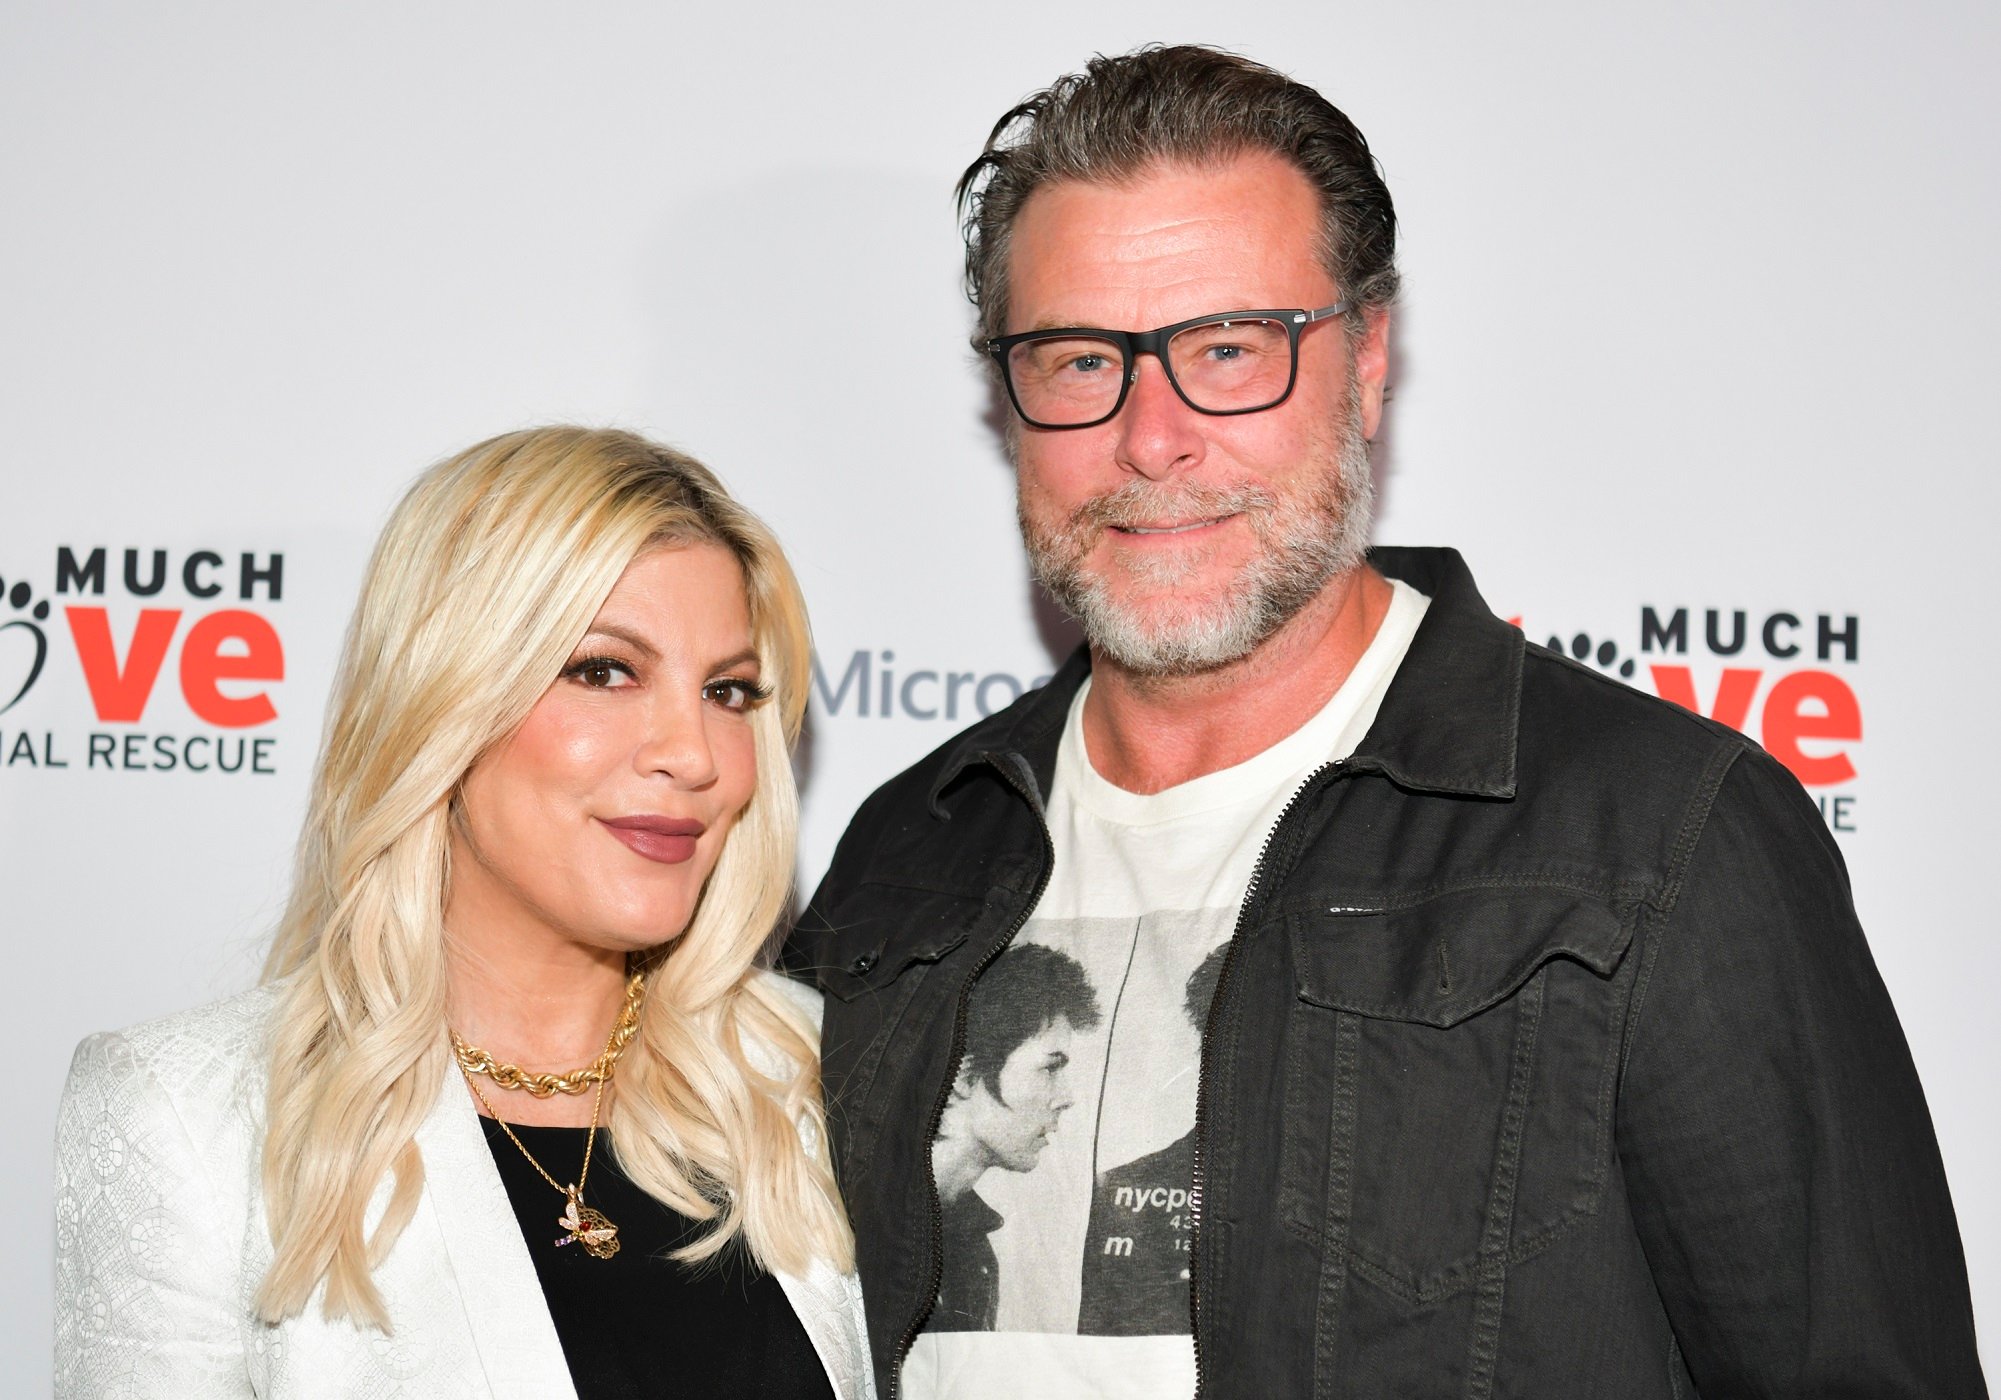 Tori Spelling and Dean McDermott pose for a photo after arriving at the Much Love Animal Rescue's 3rd Annual Spoken Woof Benefit in 2019